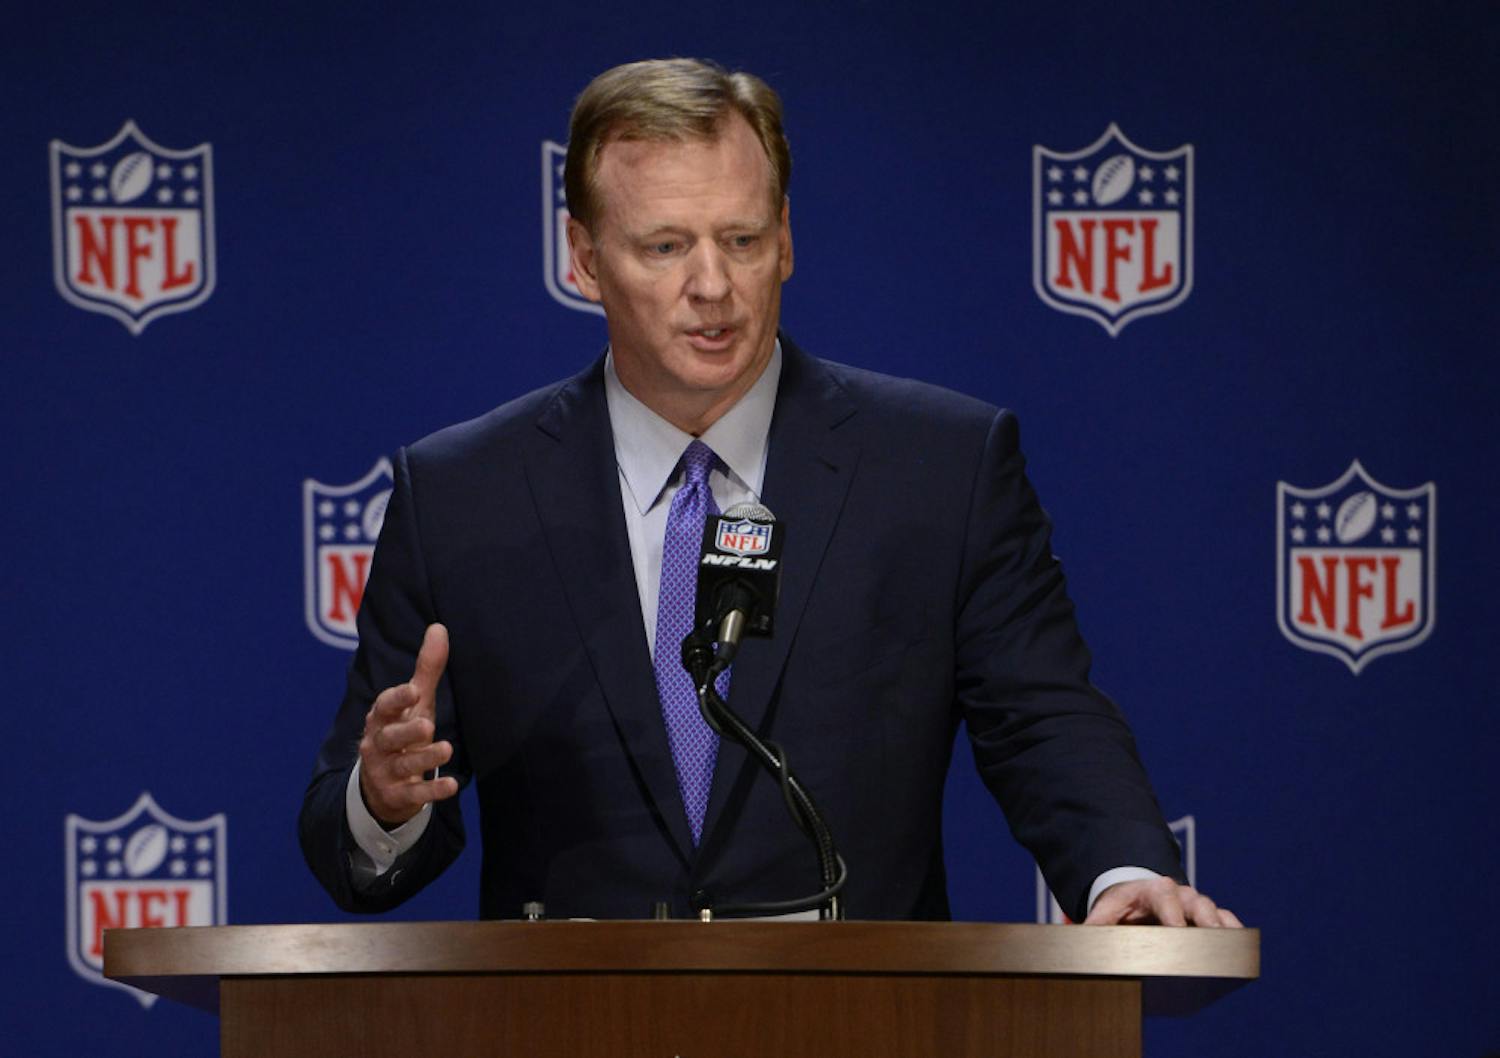 NFL commissioner Roger Goodell speaks to the media after an NFL owners meeting, Tuesday, May 23, 2017, in Chicago.